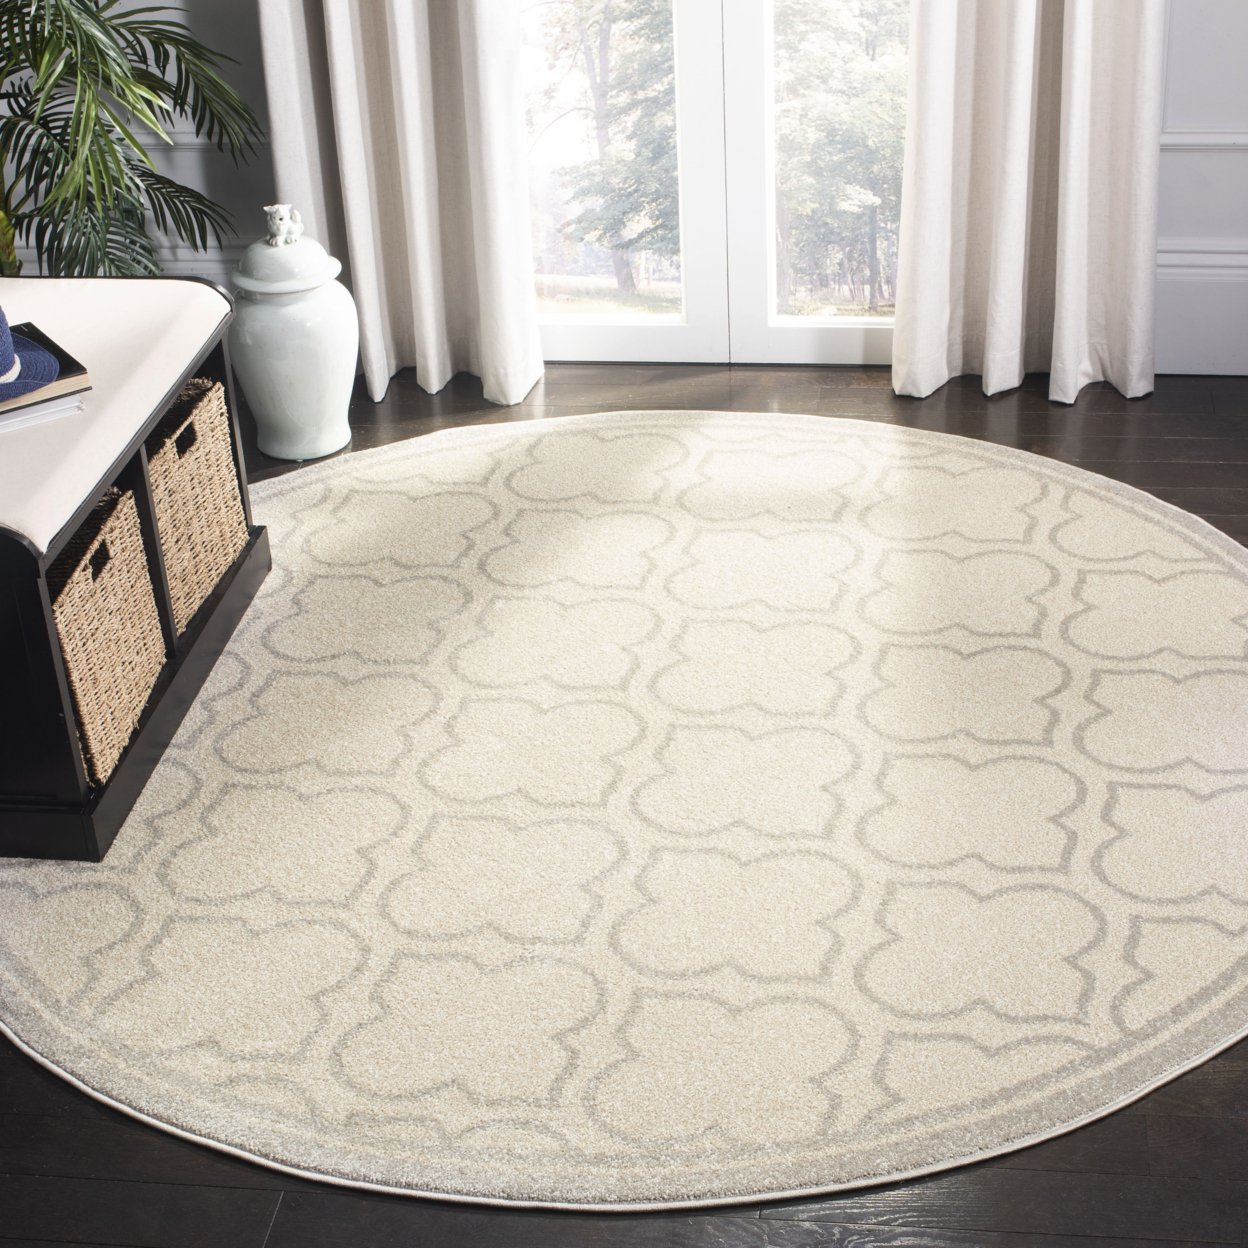 SAFAVIEH Amherst Collection AMT412E Ivory/Light Grey Rug - 7' Round